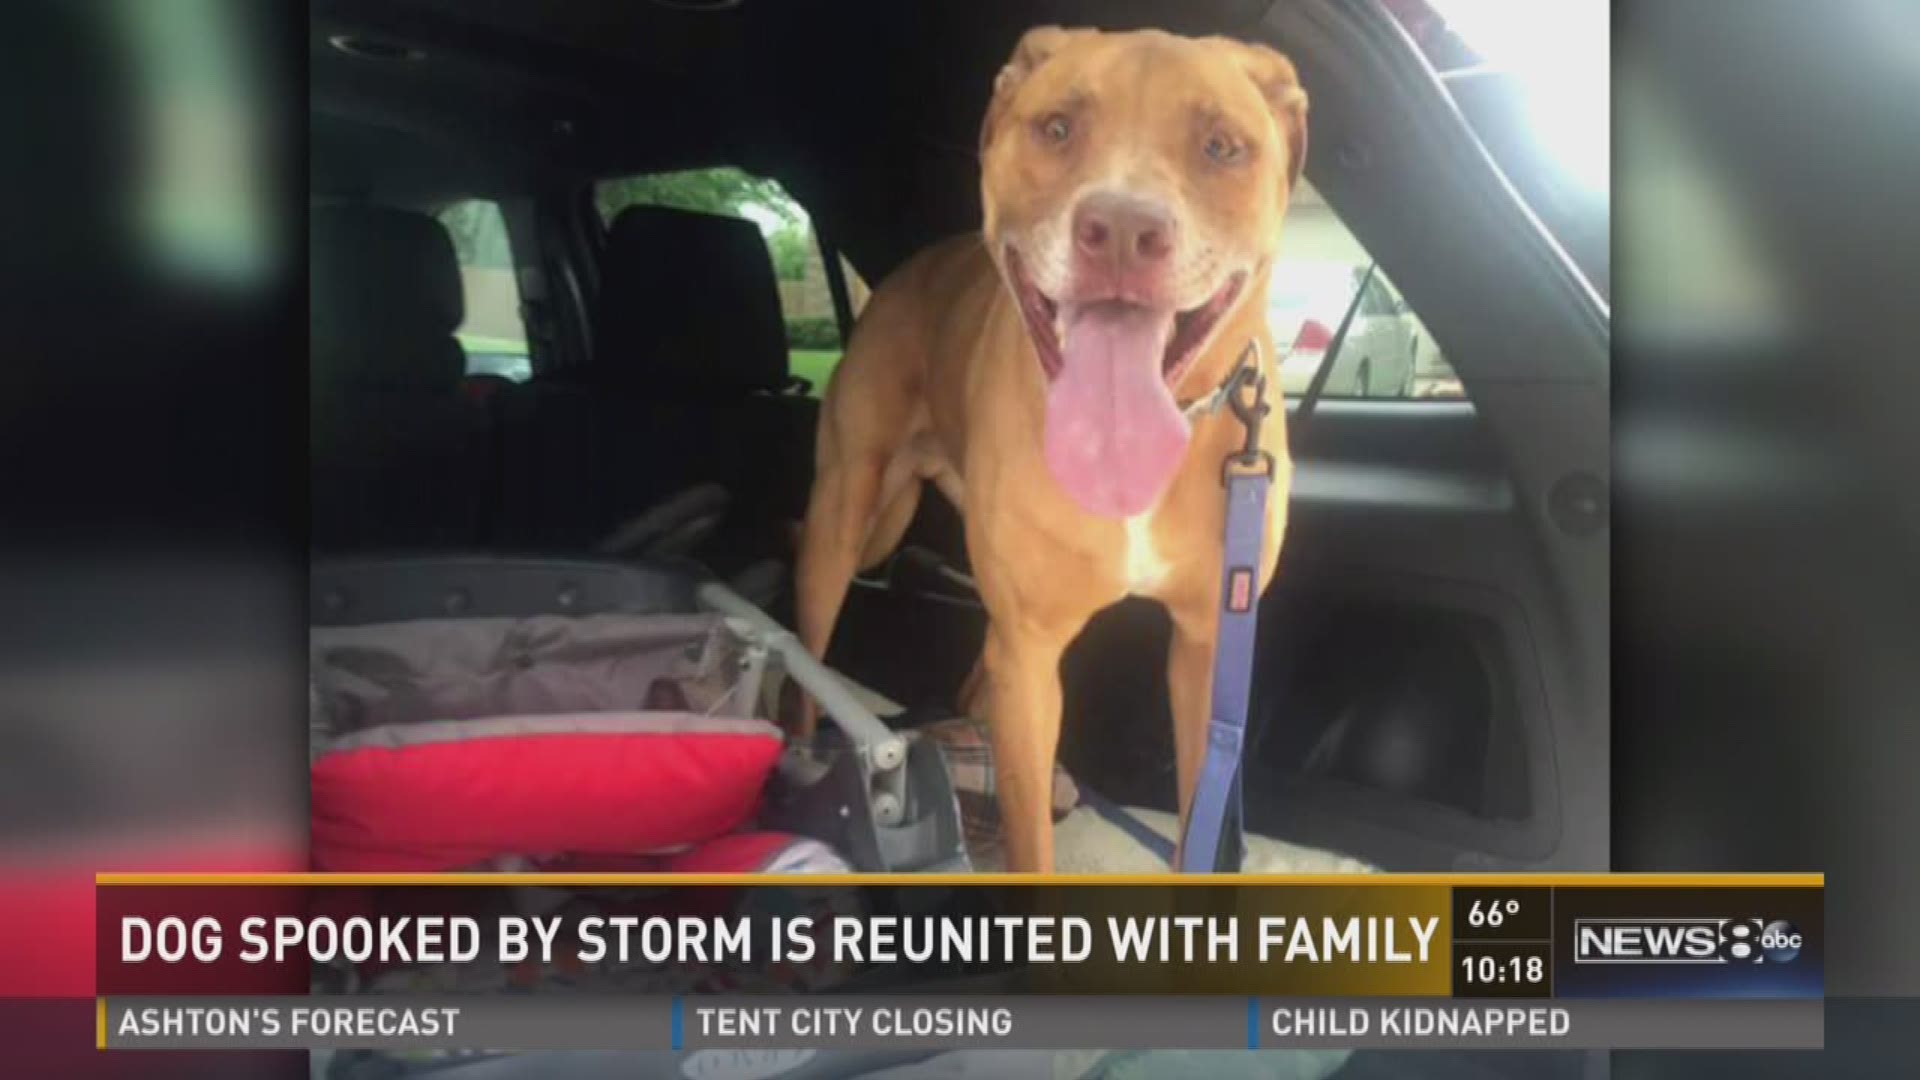 Pluto is back in his family's orbit just in time for his fourth birthday after being away for weeks. Jason Wheeler has the story.